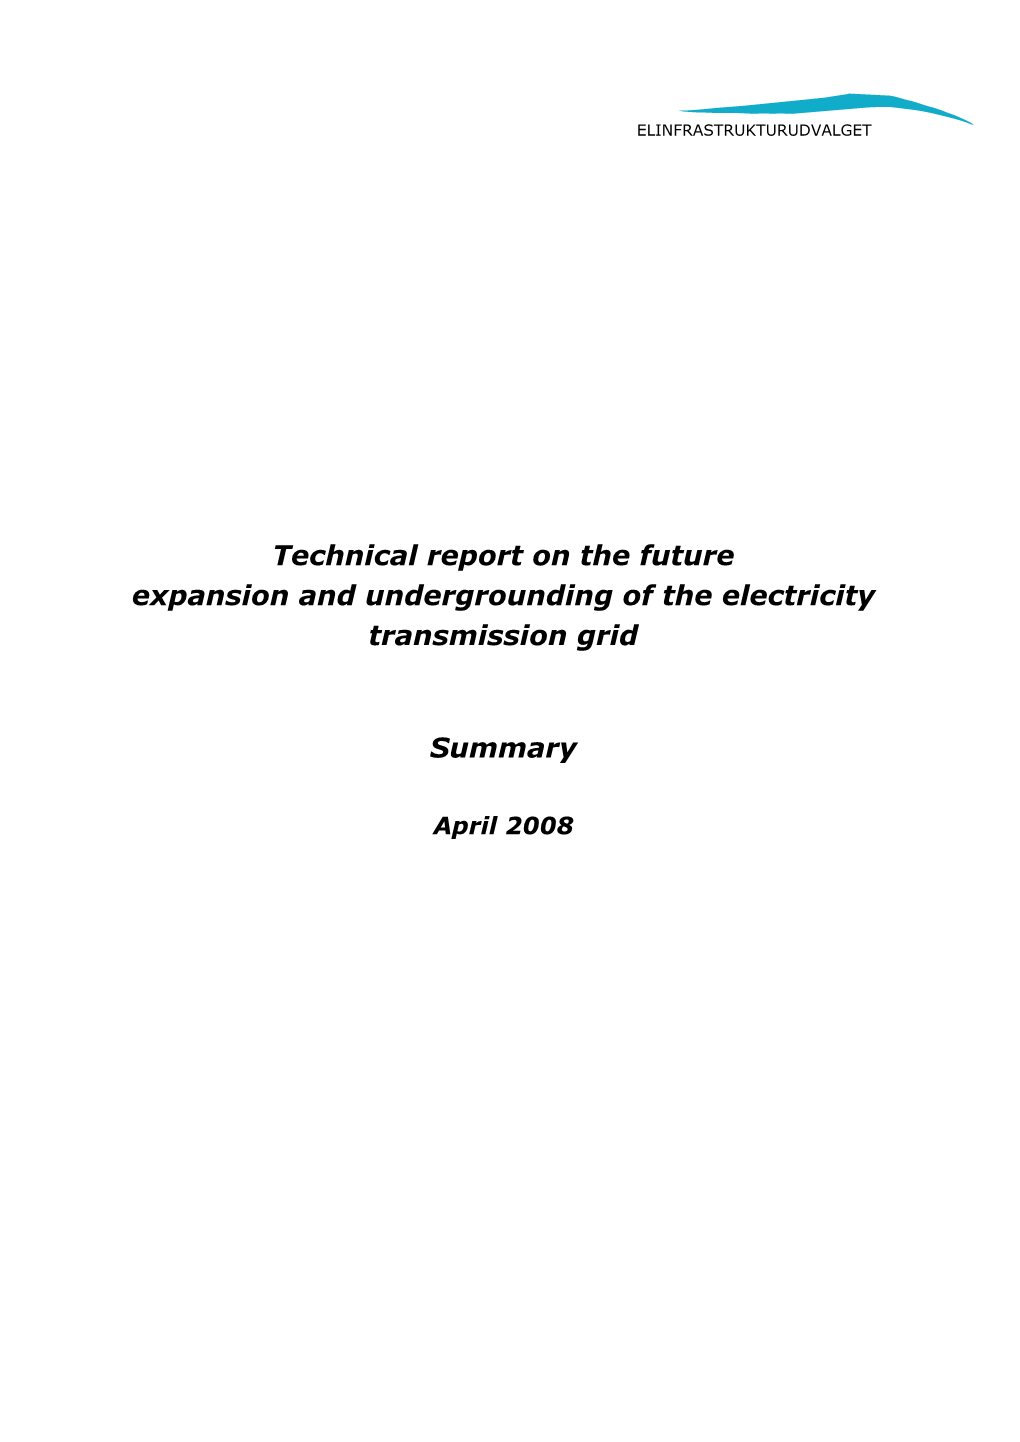 Technical Report on the Future Expansion and Undergrounding of the Electricity Transmission Grid